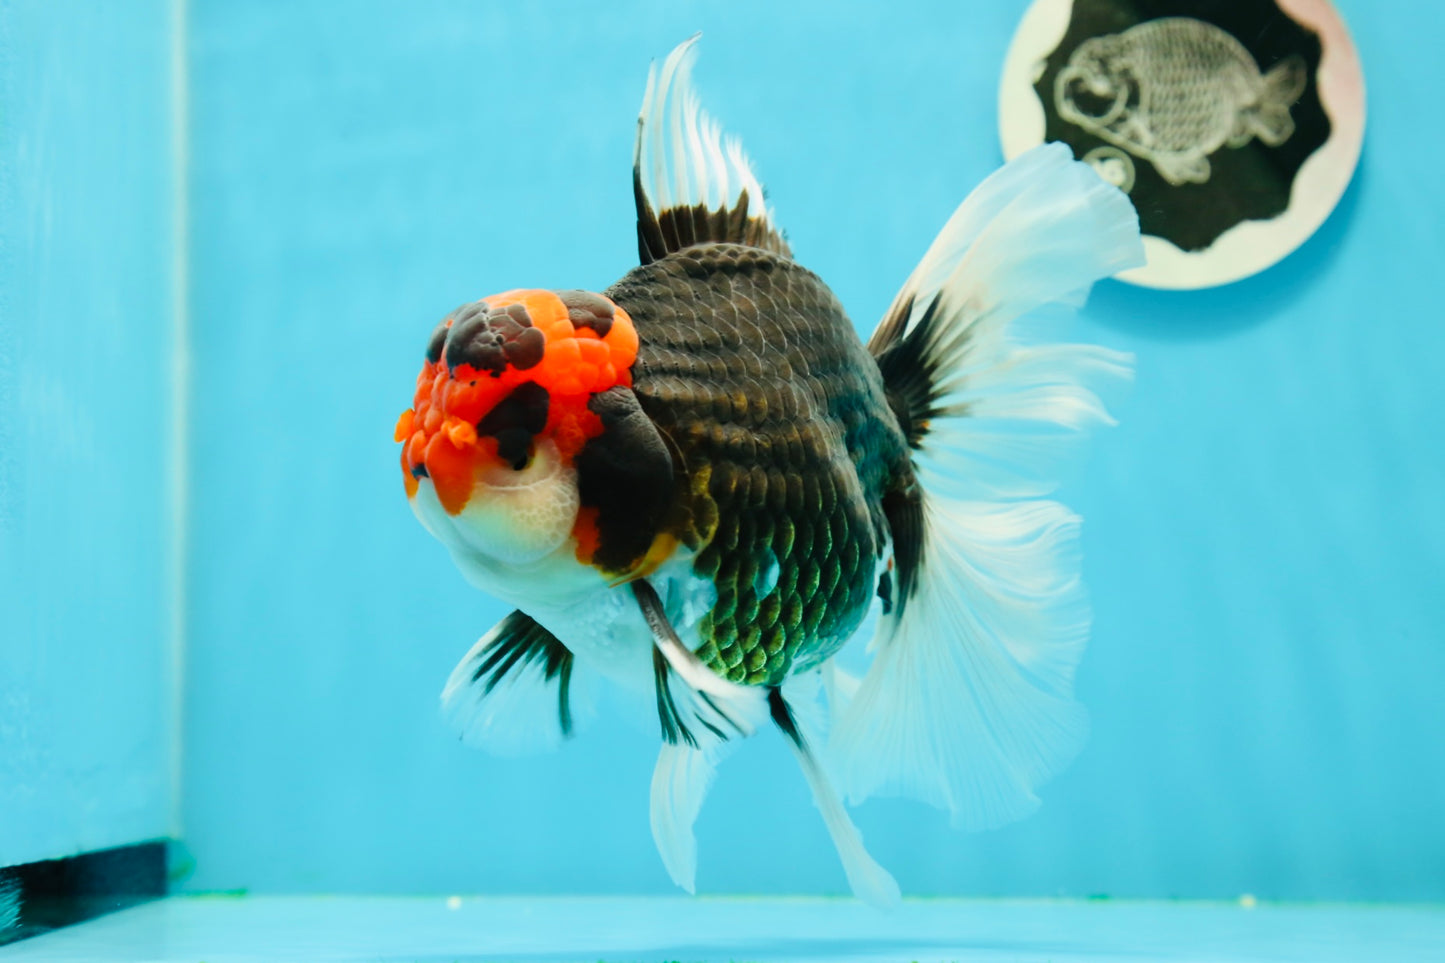 AAA Grade Special Tricolor Giant Generation Oranda Male 5.5-6 inches #0308OR_07